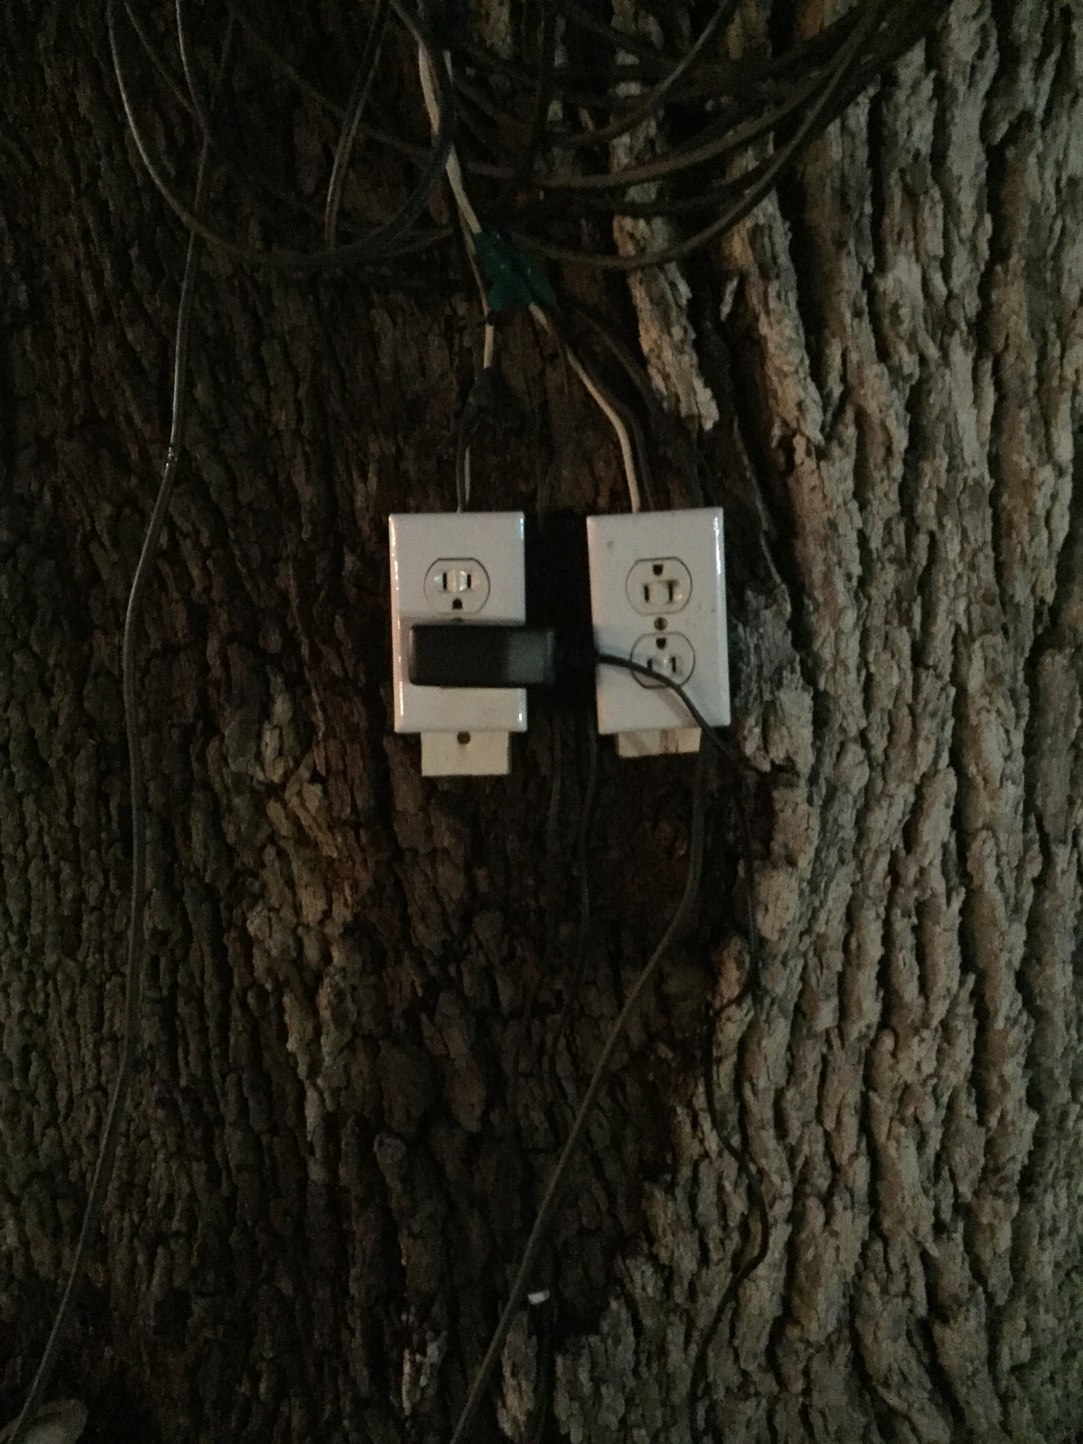 there's an outlet in a tree??????? - meme